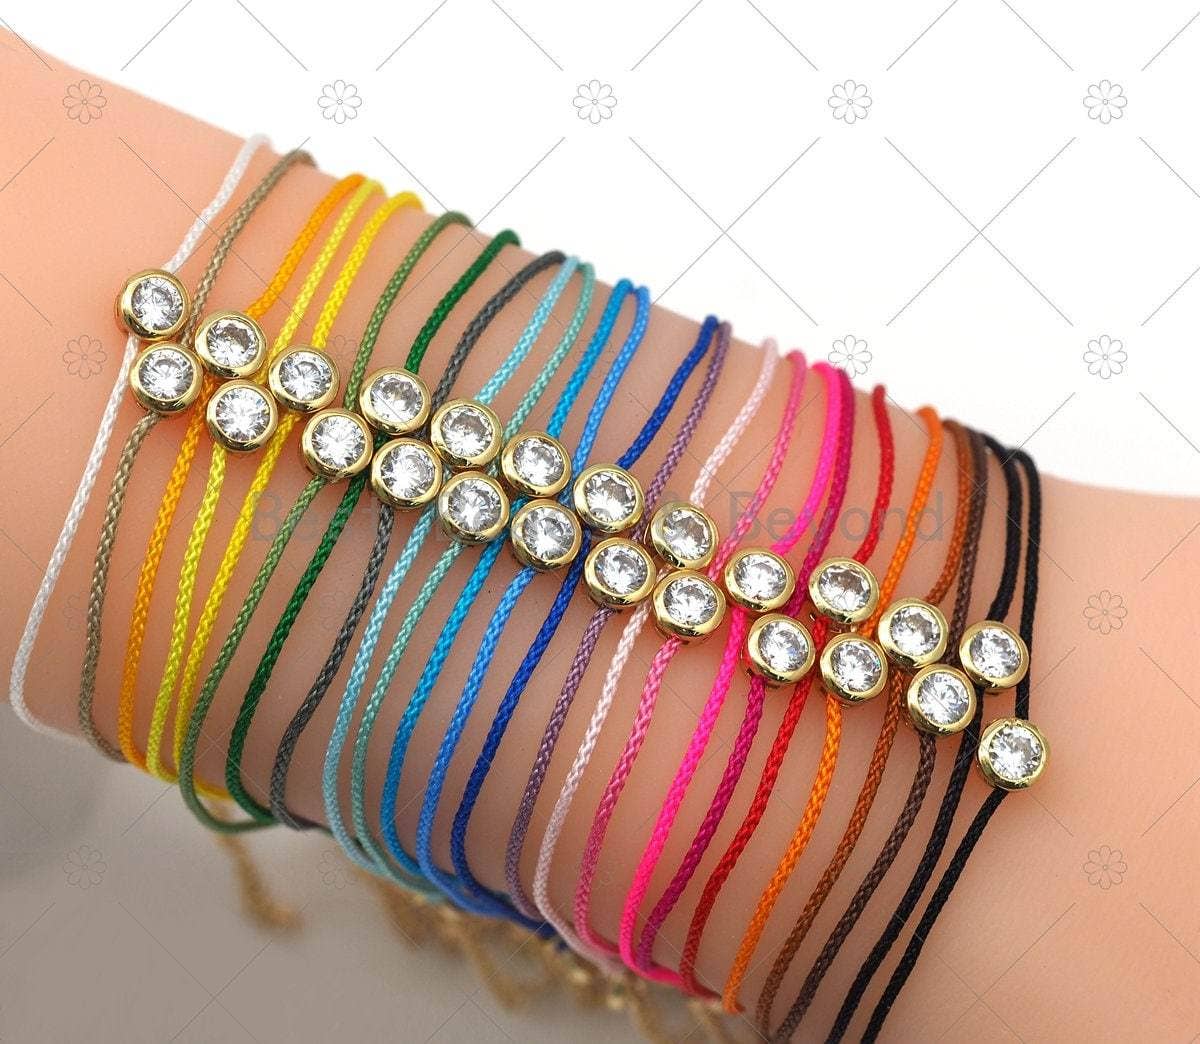 Mlgm Beads Bracelet Women Friends Gift Mexican Bracelets Inspired Jewelry  Lady Pulseras Handmade Woven Fine Piercing Imitation Rope Jewellery  Wholesale  China Piercing Jewelry and Fine Jewelry price   MadeinChinacom